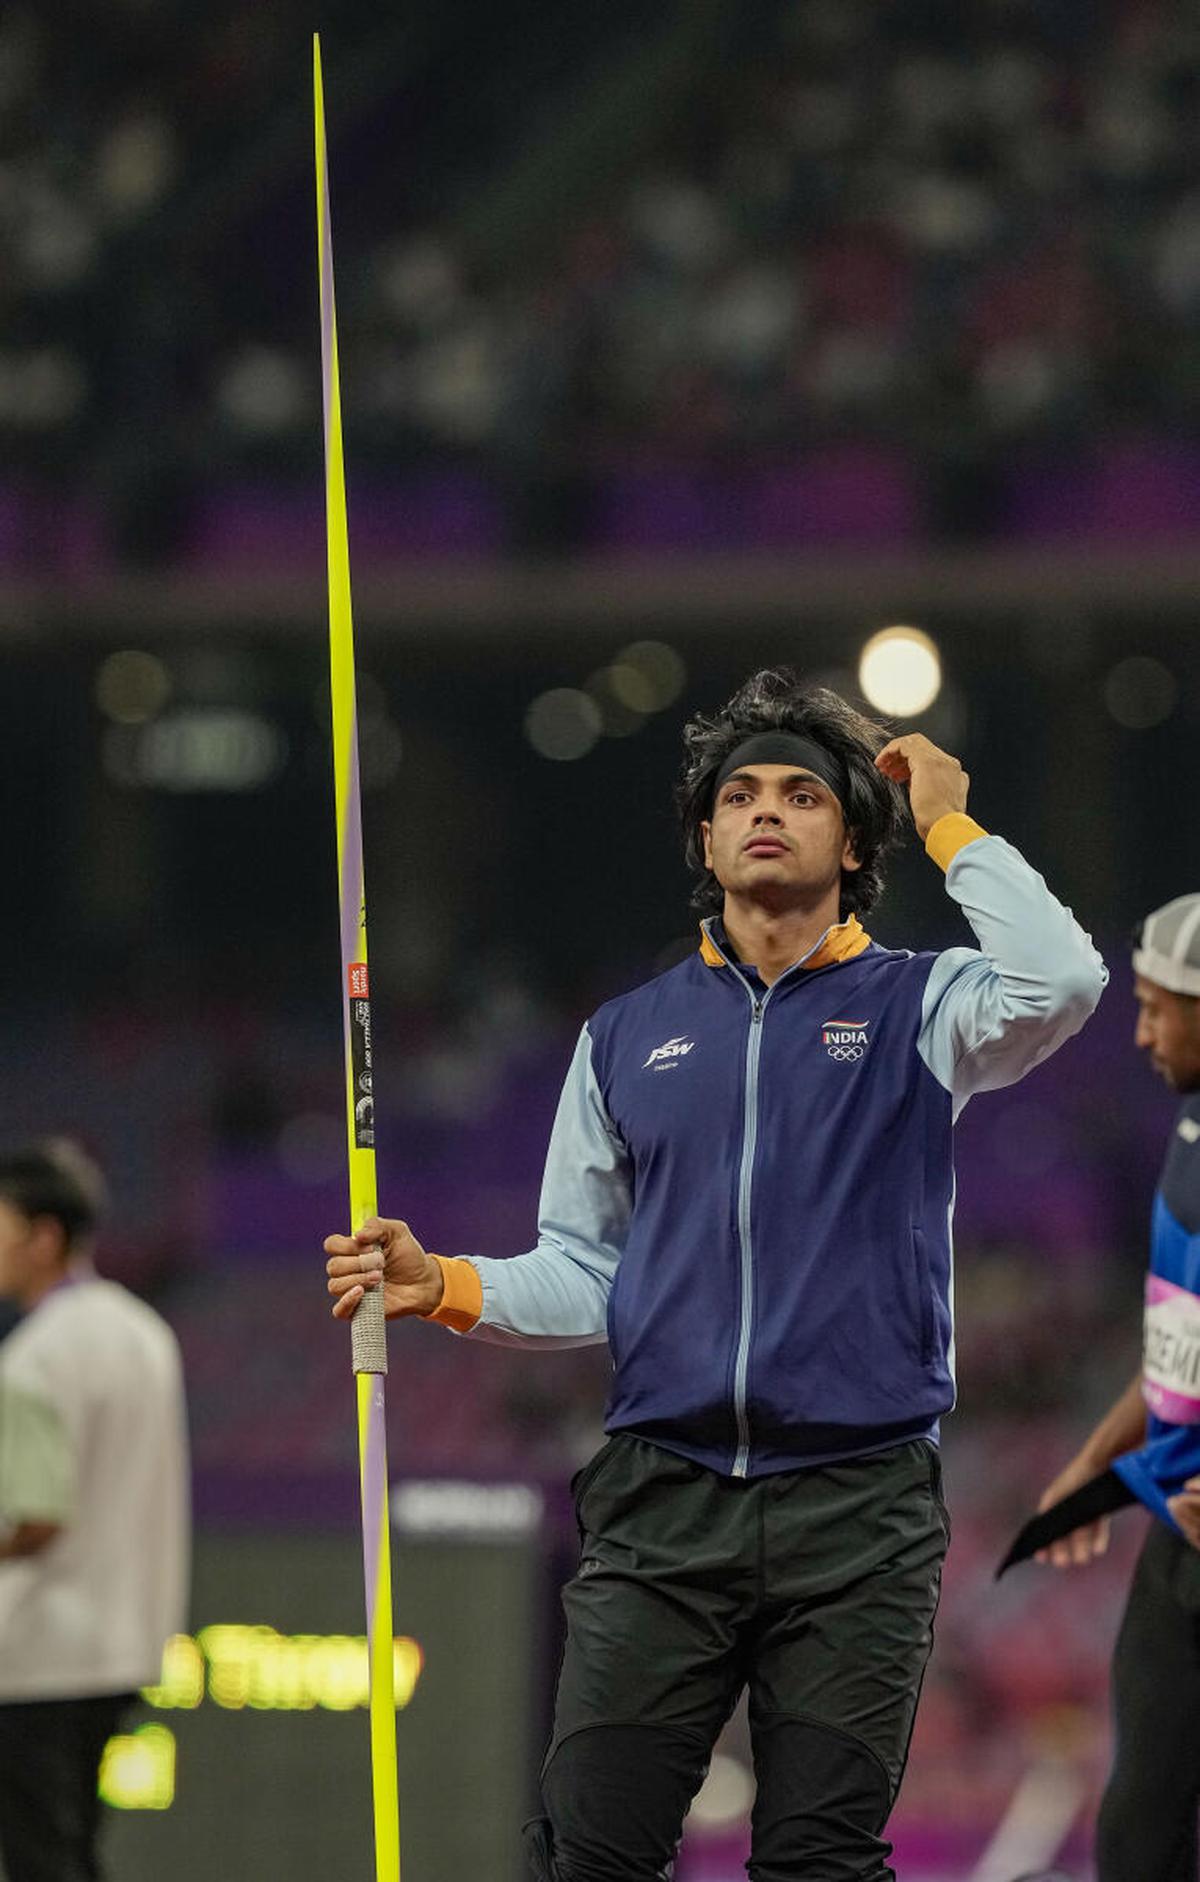 Why did Neeraj Chopra get seven throws instead of six in the Asian